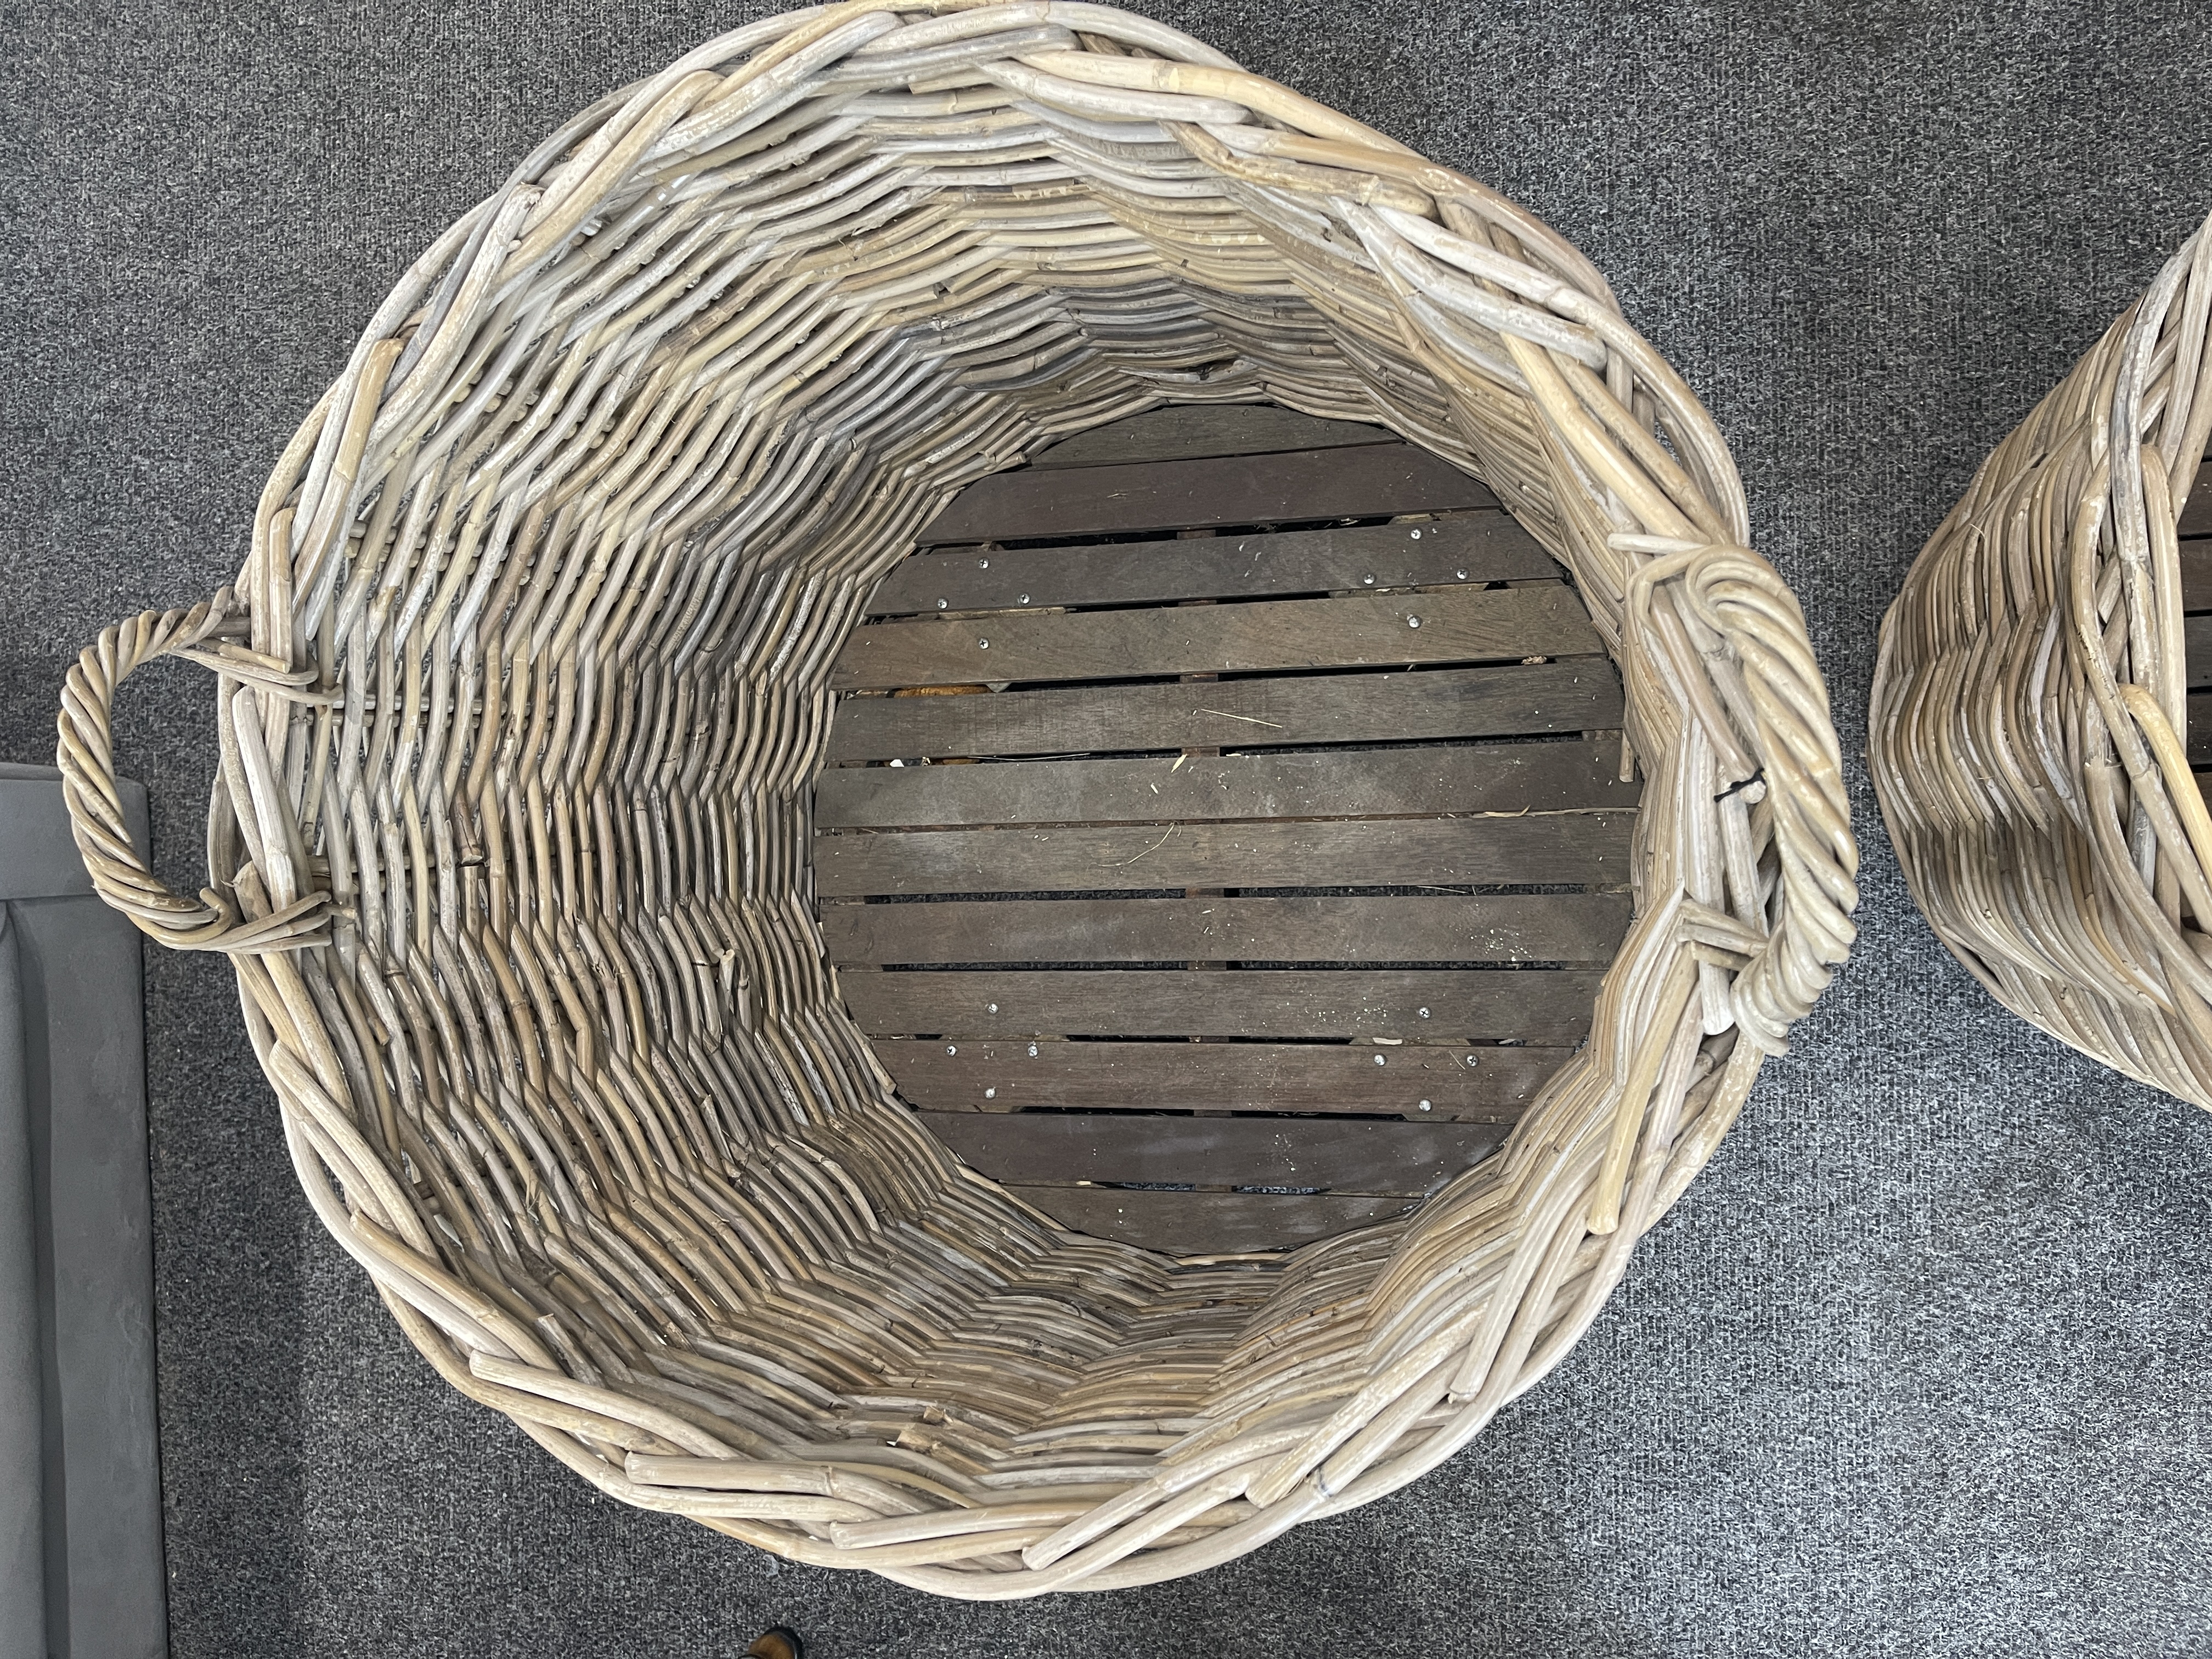 Two Large Vintage Wicker Baskets / Garden Rooms. - Image 4 of 7